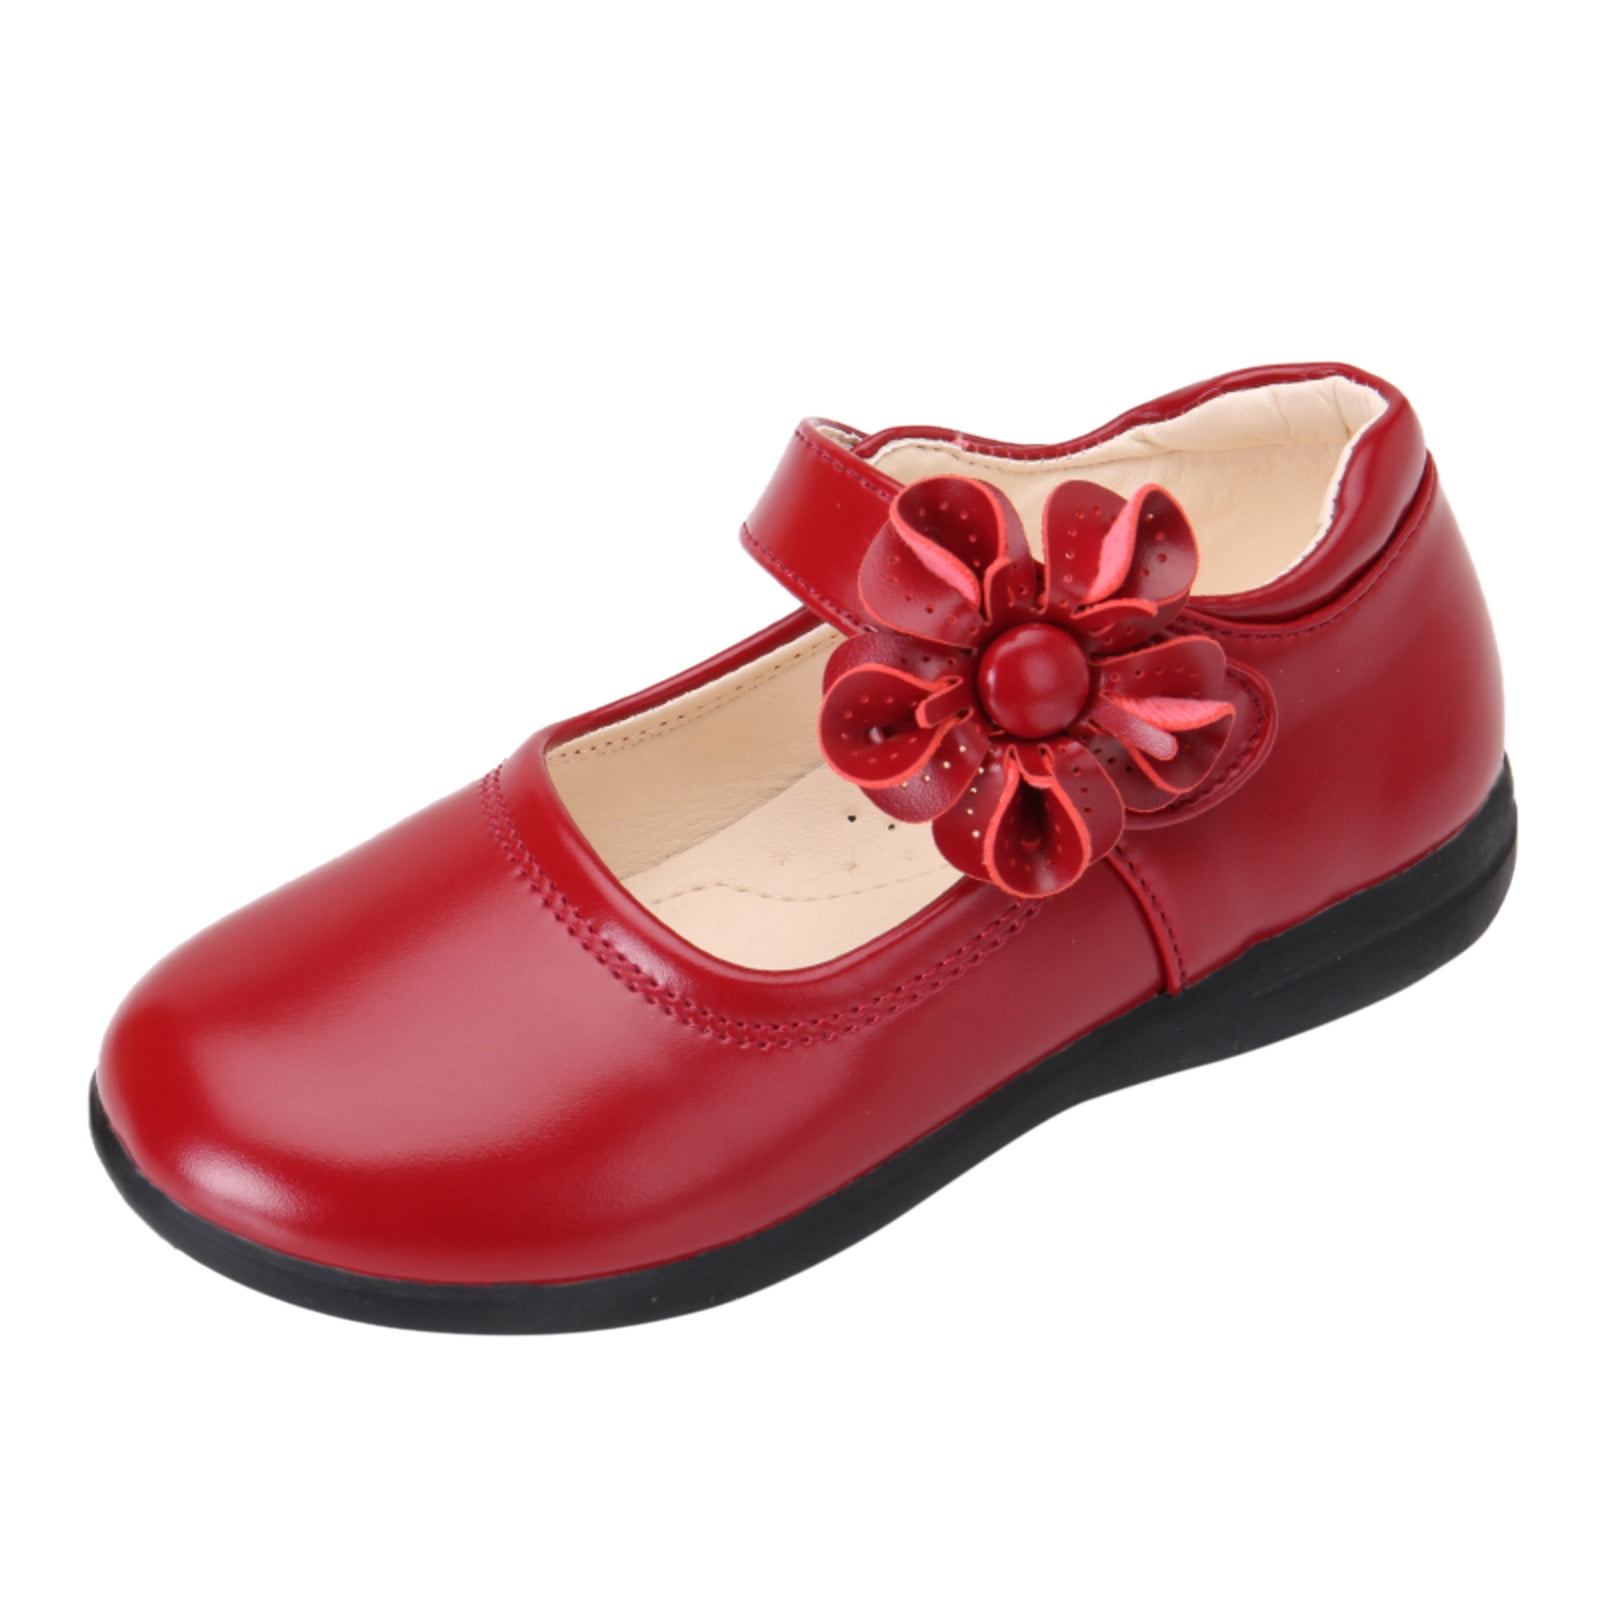 Baby Shoes Children Kid Baby Girls Flower Leather Shoes Single Soft ...